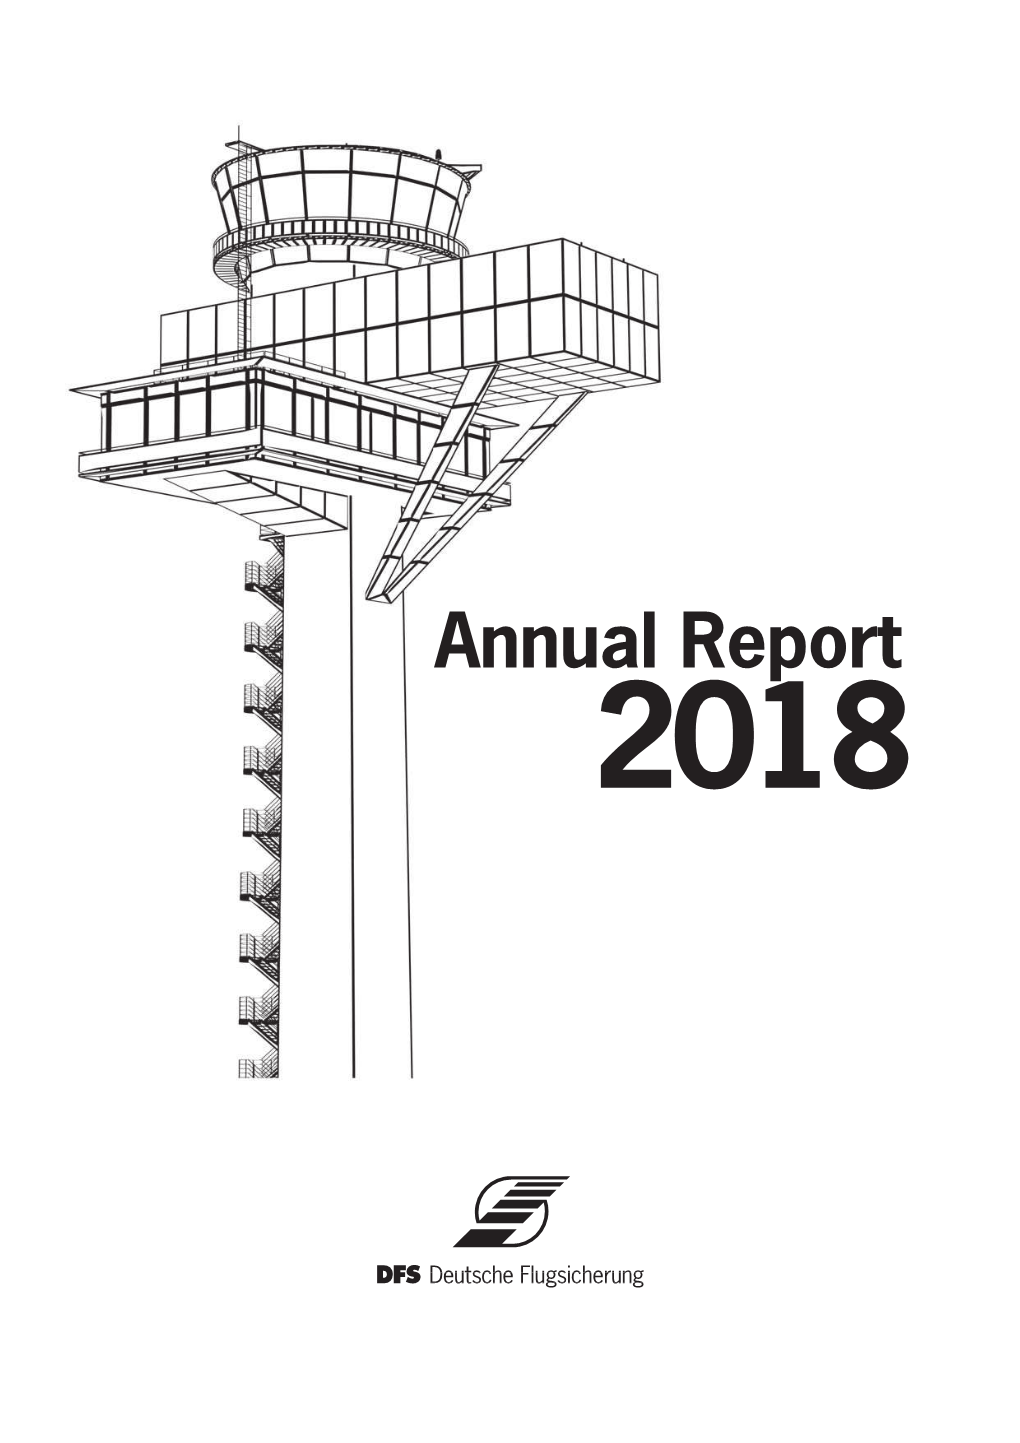 Annual Report 2018 You Can Download Or Order This Annual Report at the Business Year 2018